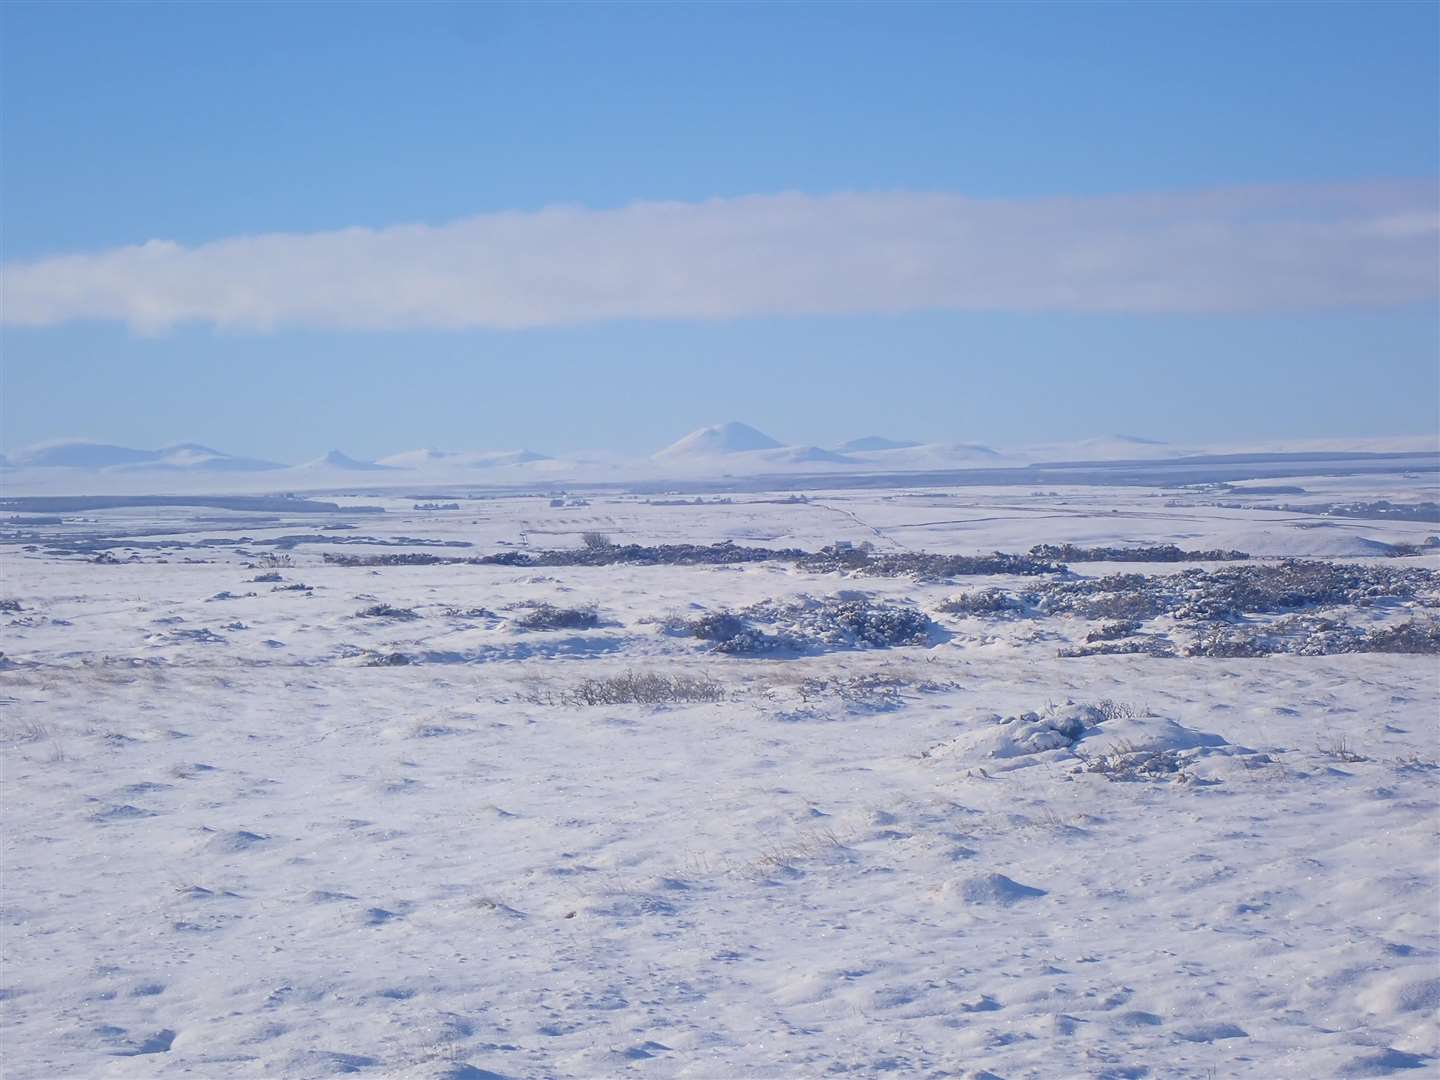 The hills of the far north are outlined in stark relief in the bright snow and shadows.